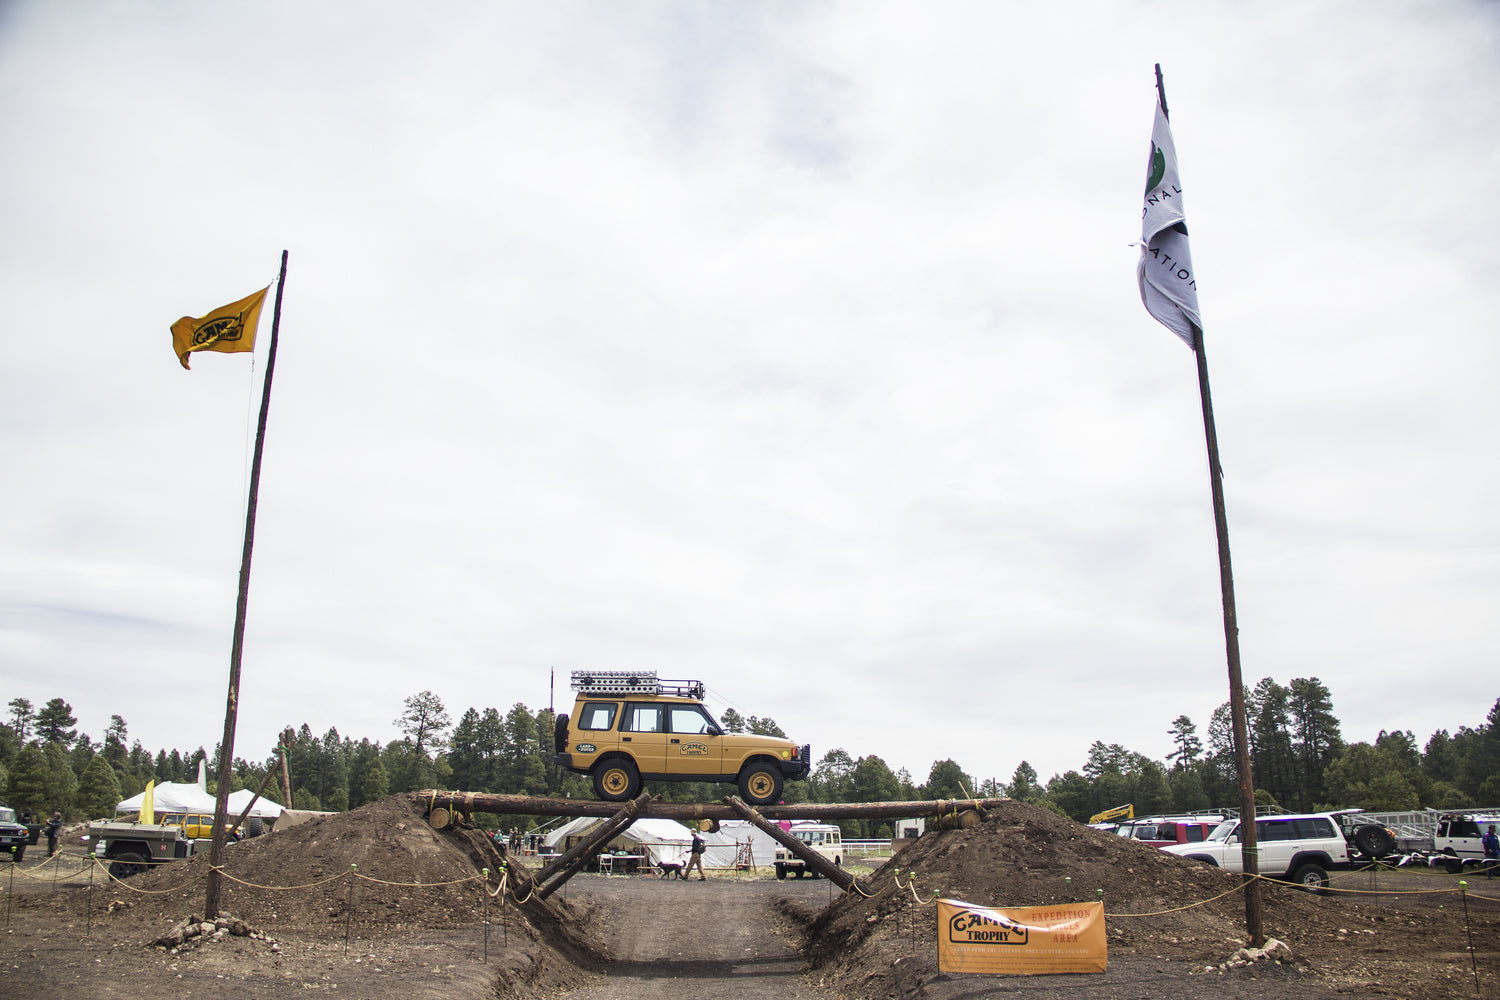 DECKED DIARIES: OVERLAND EXPO WEST